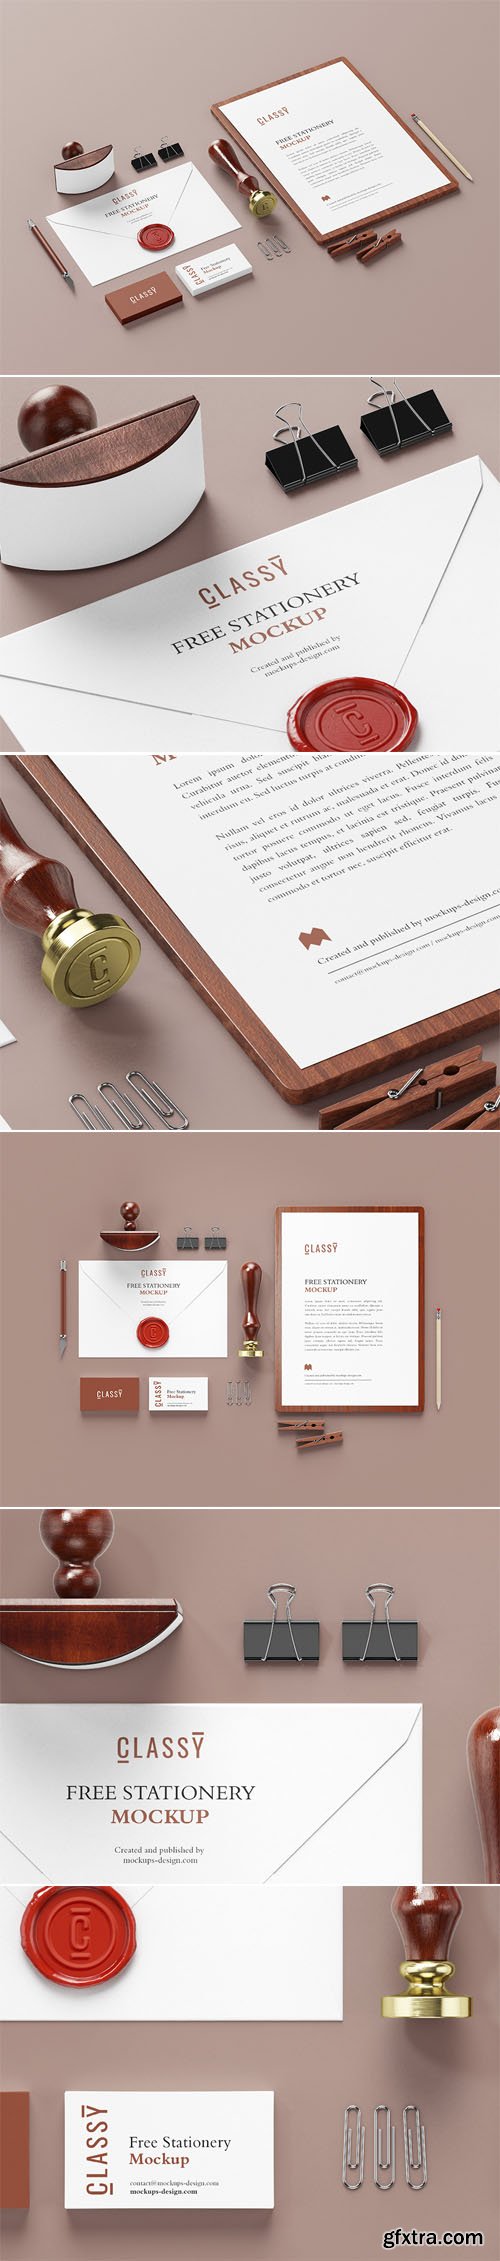 Wooden Stationery PSD Mockup Template